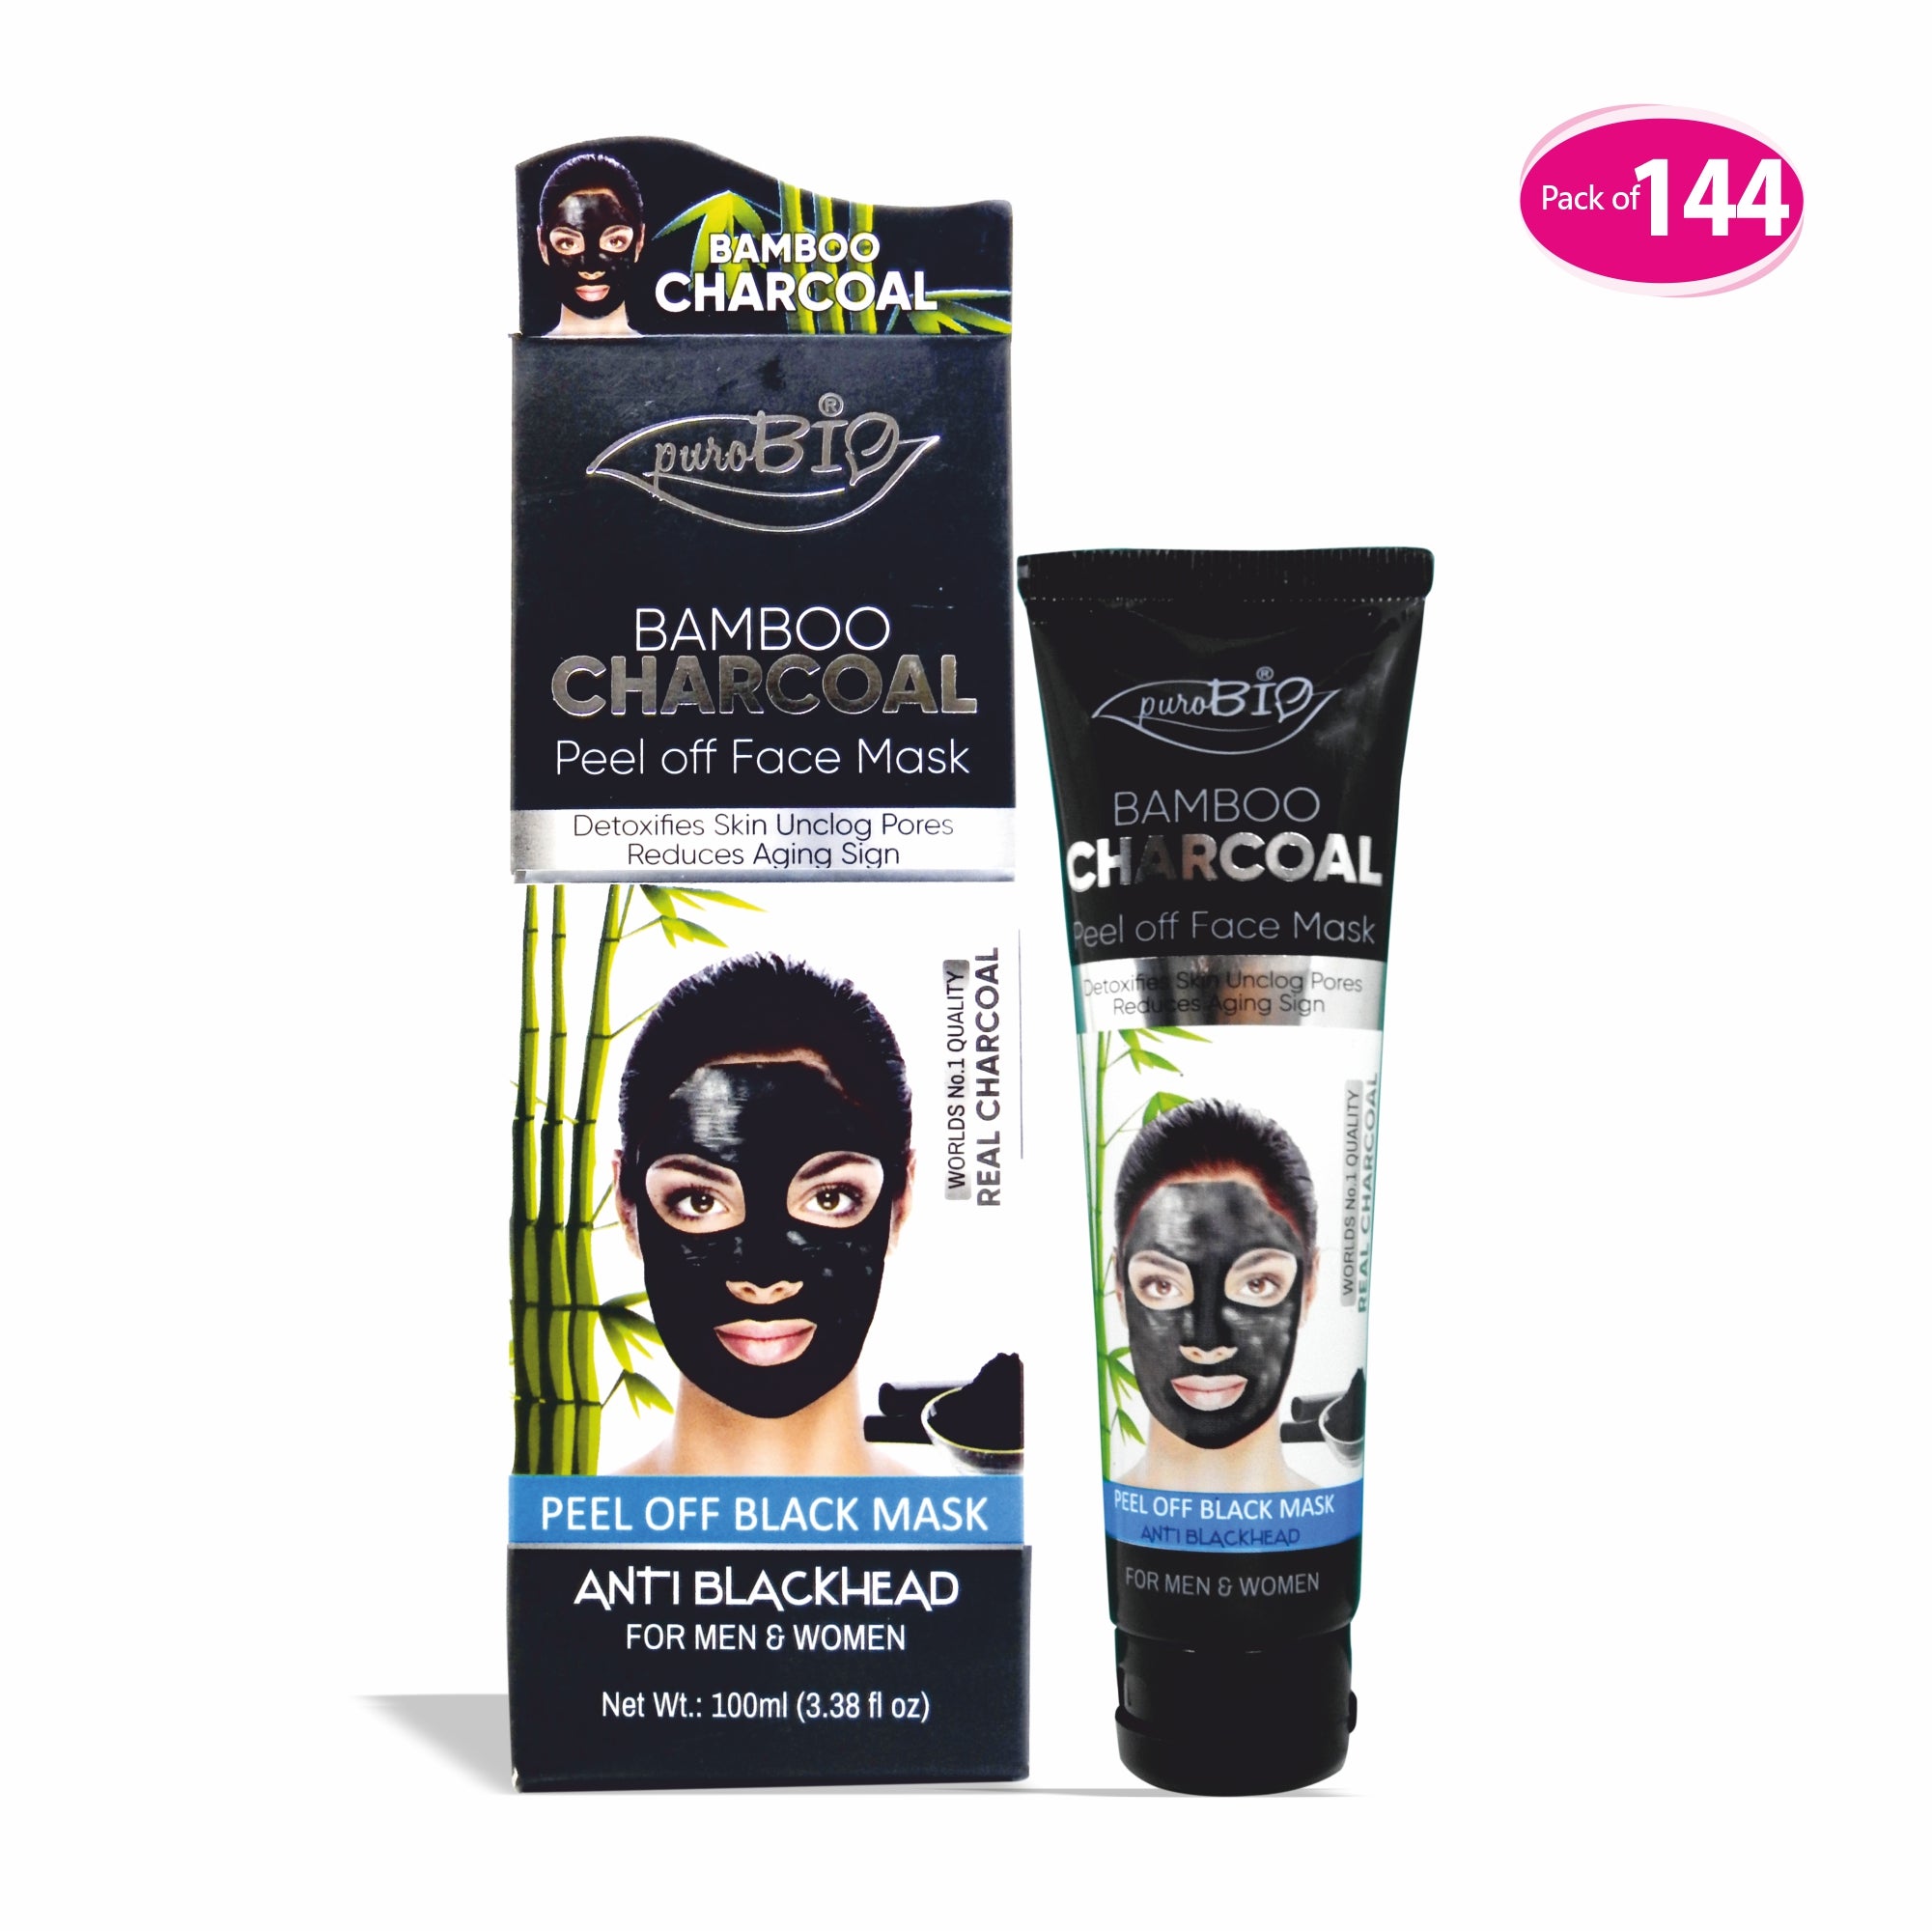 Bamboo Charcoal Peel Off Face Mask in bulk 144 quantity